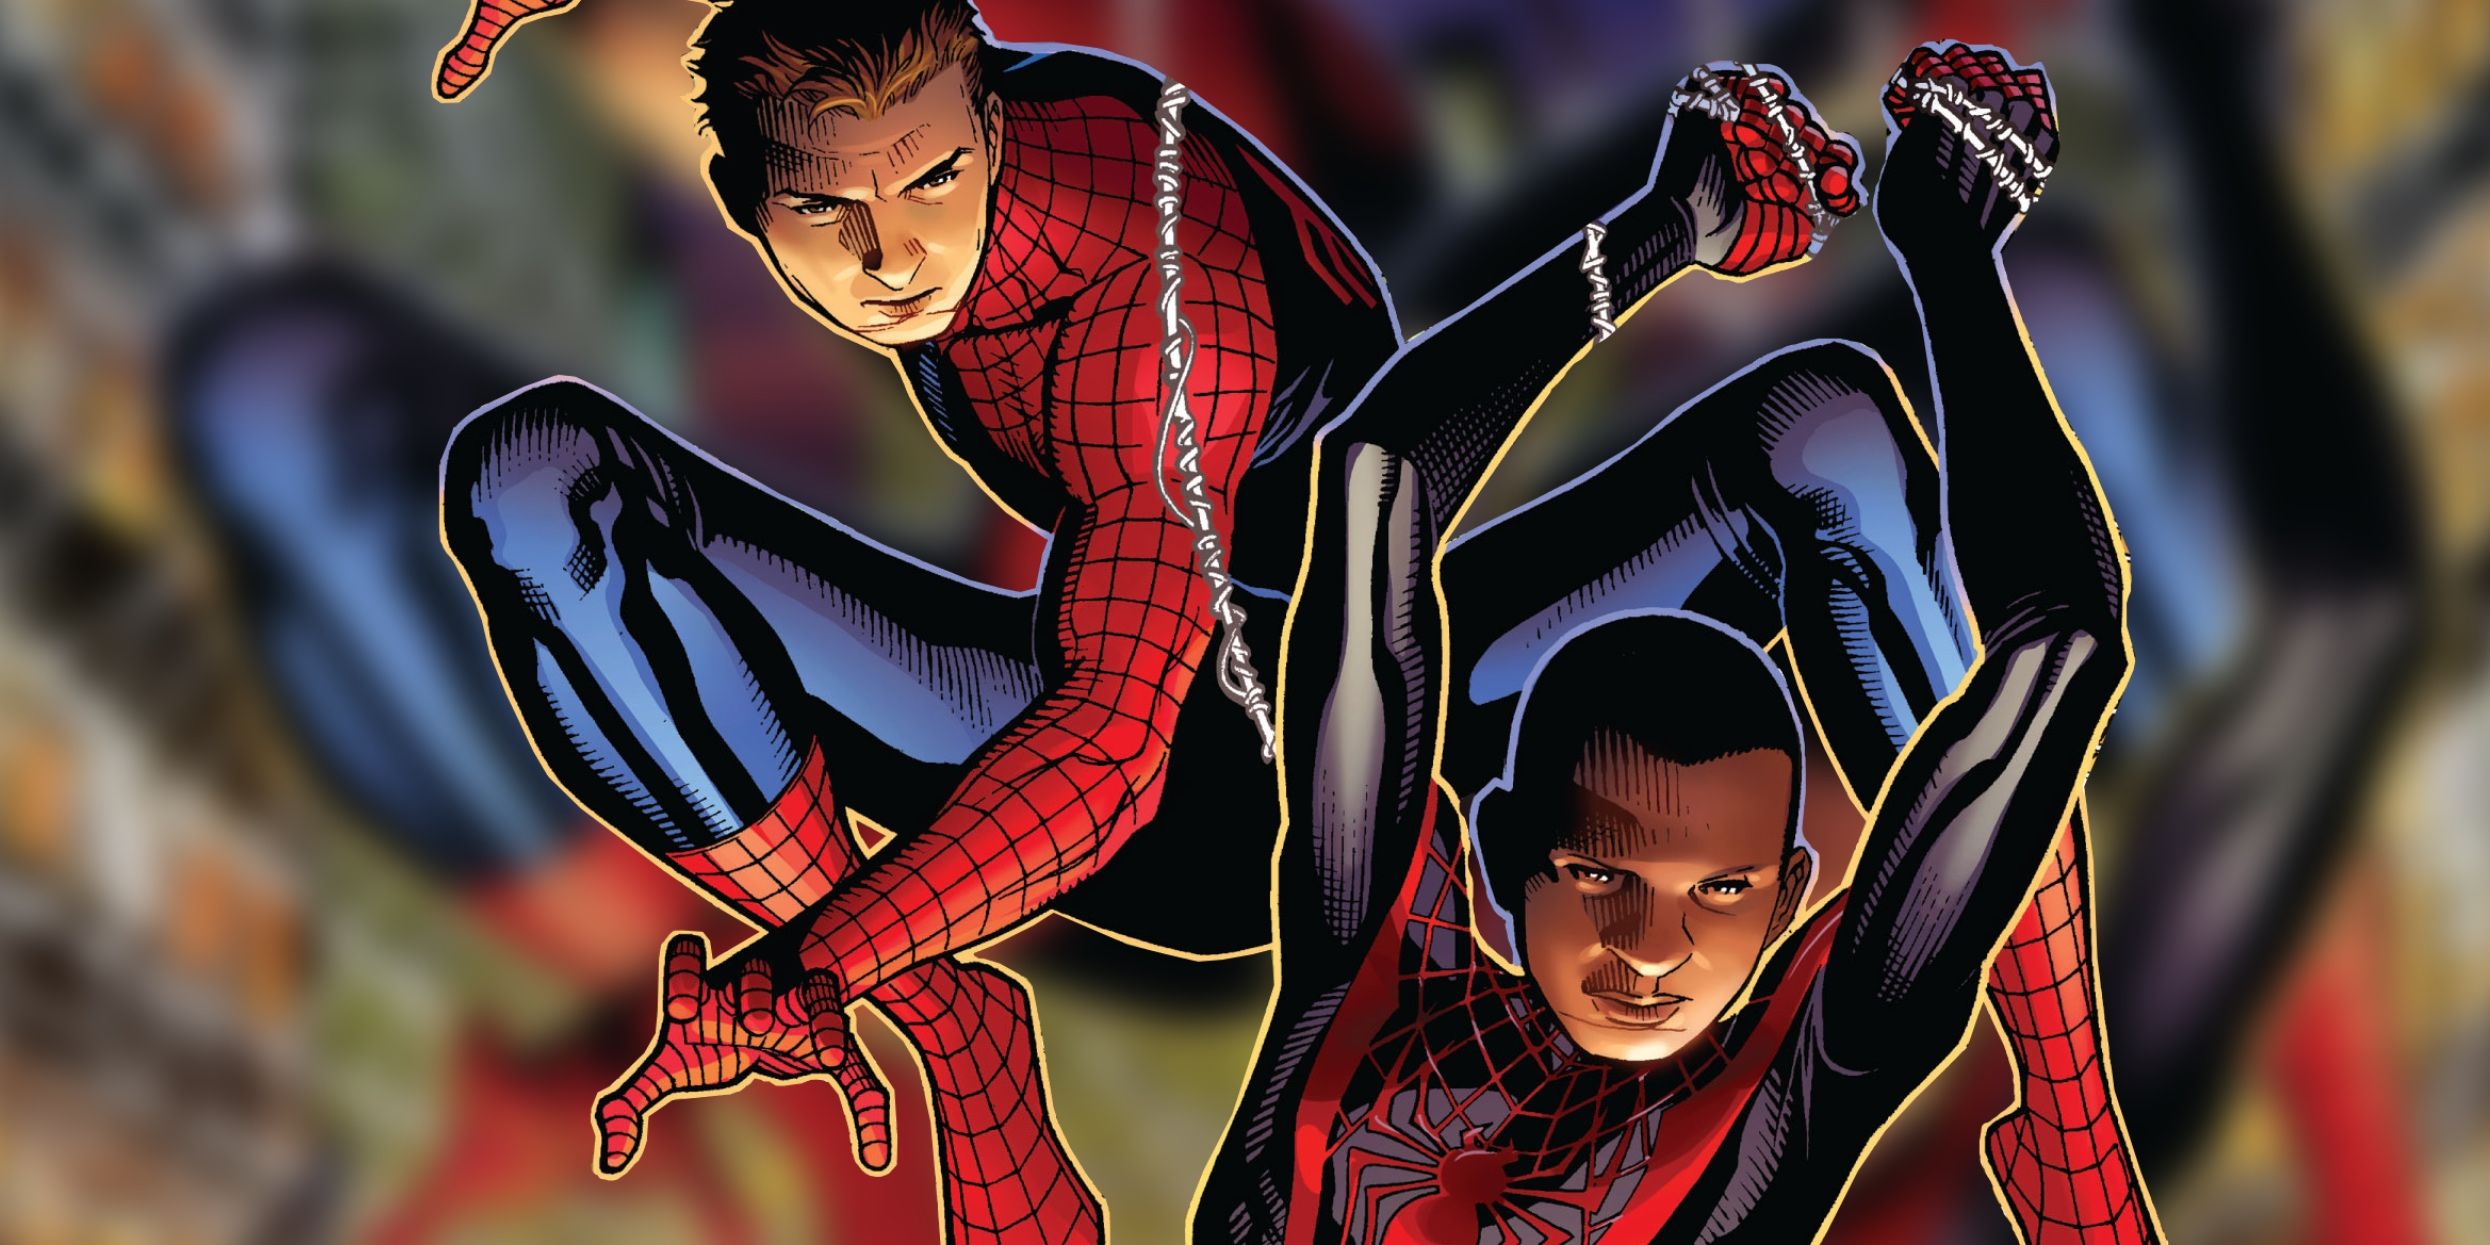 An unmasked Peter Parker and Miles Morales swing in the air in Spider-Man comics.